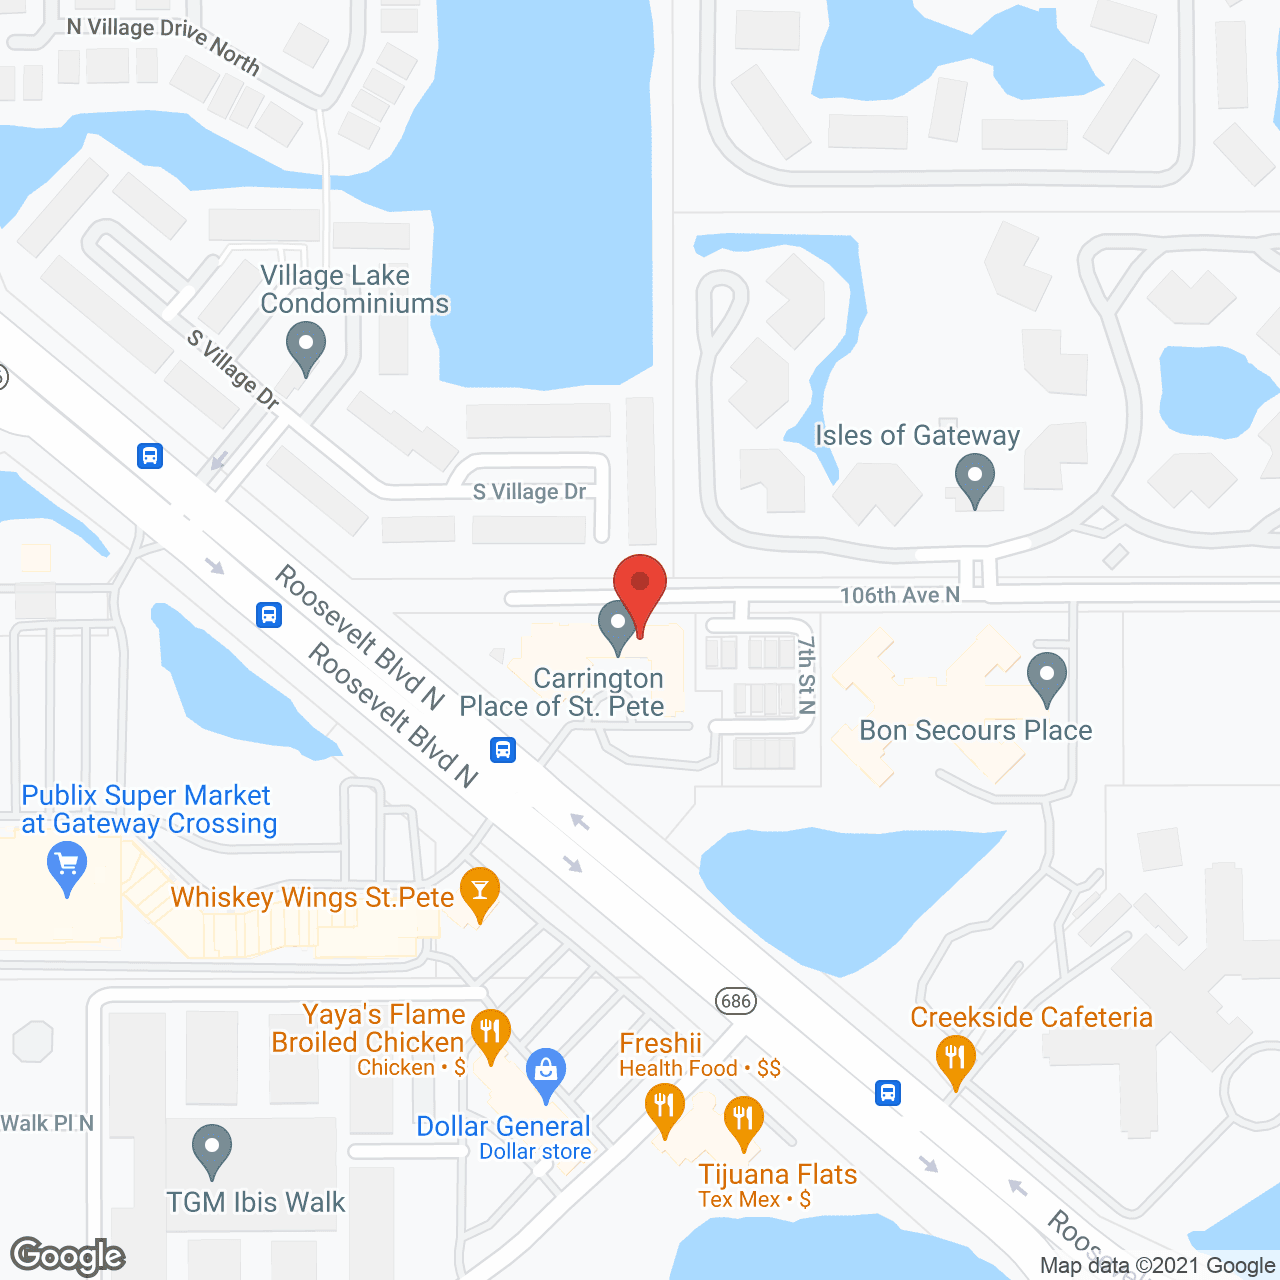 Carrington Place of St. Pete in google map